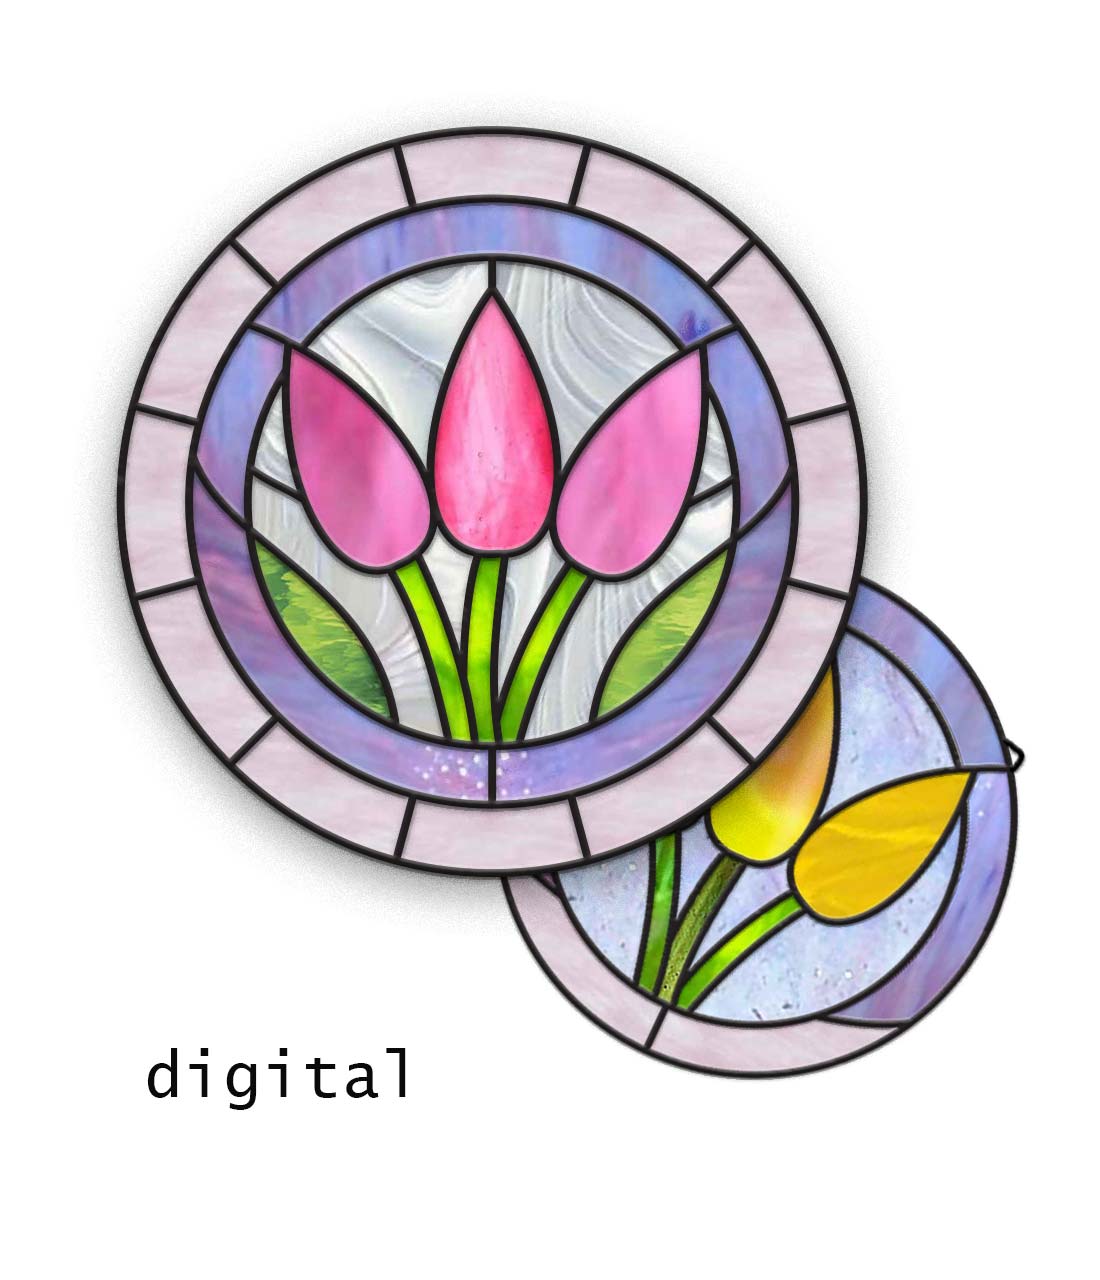 simple stained glass patterns flowers